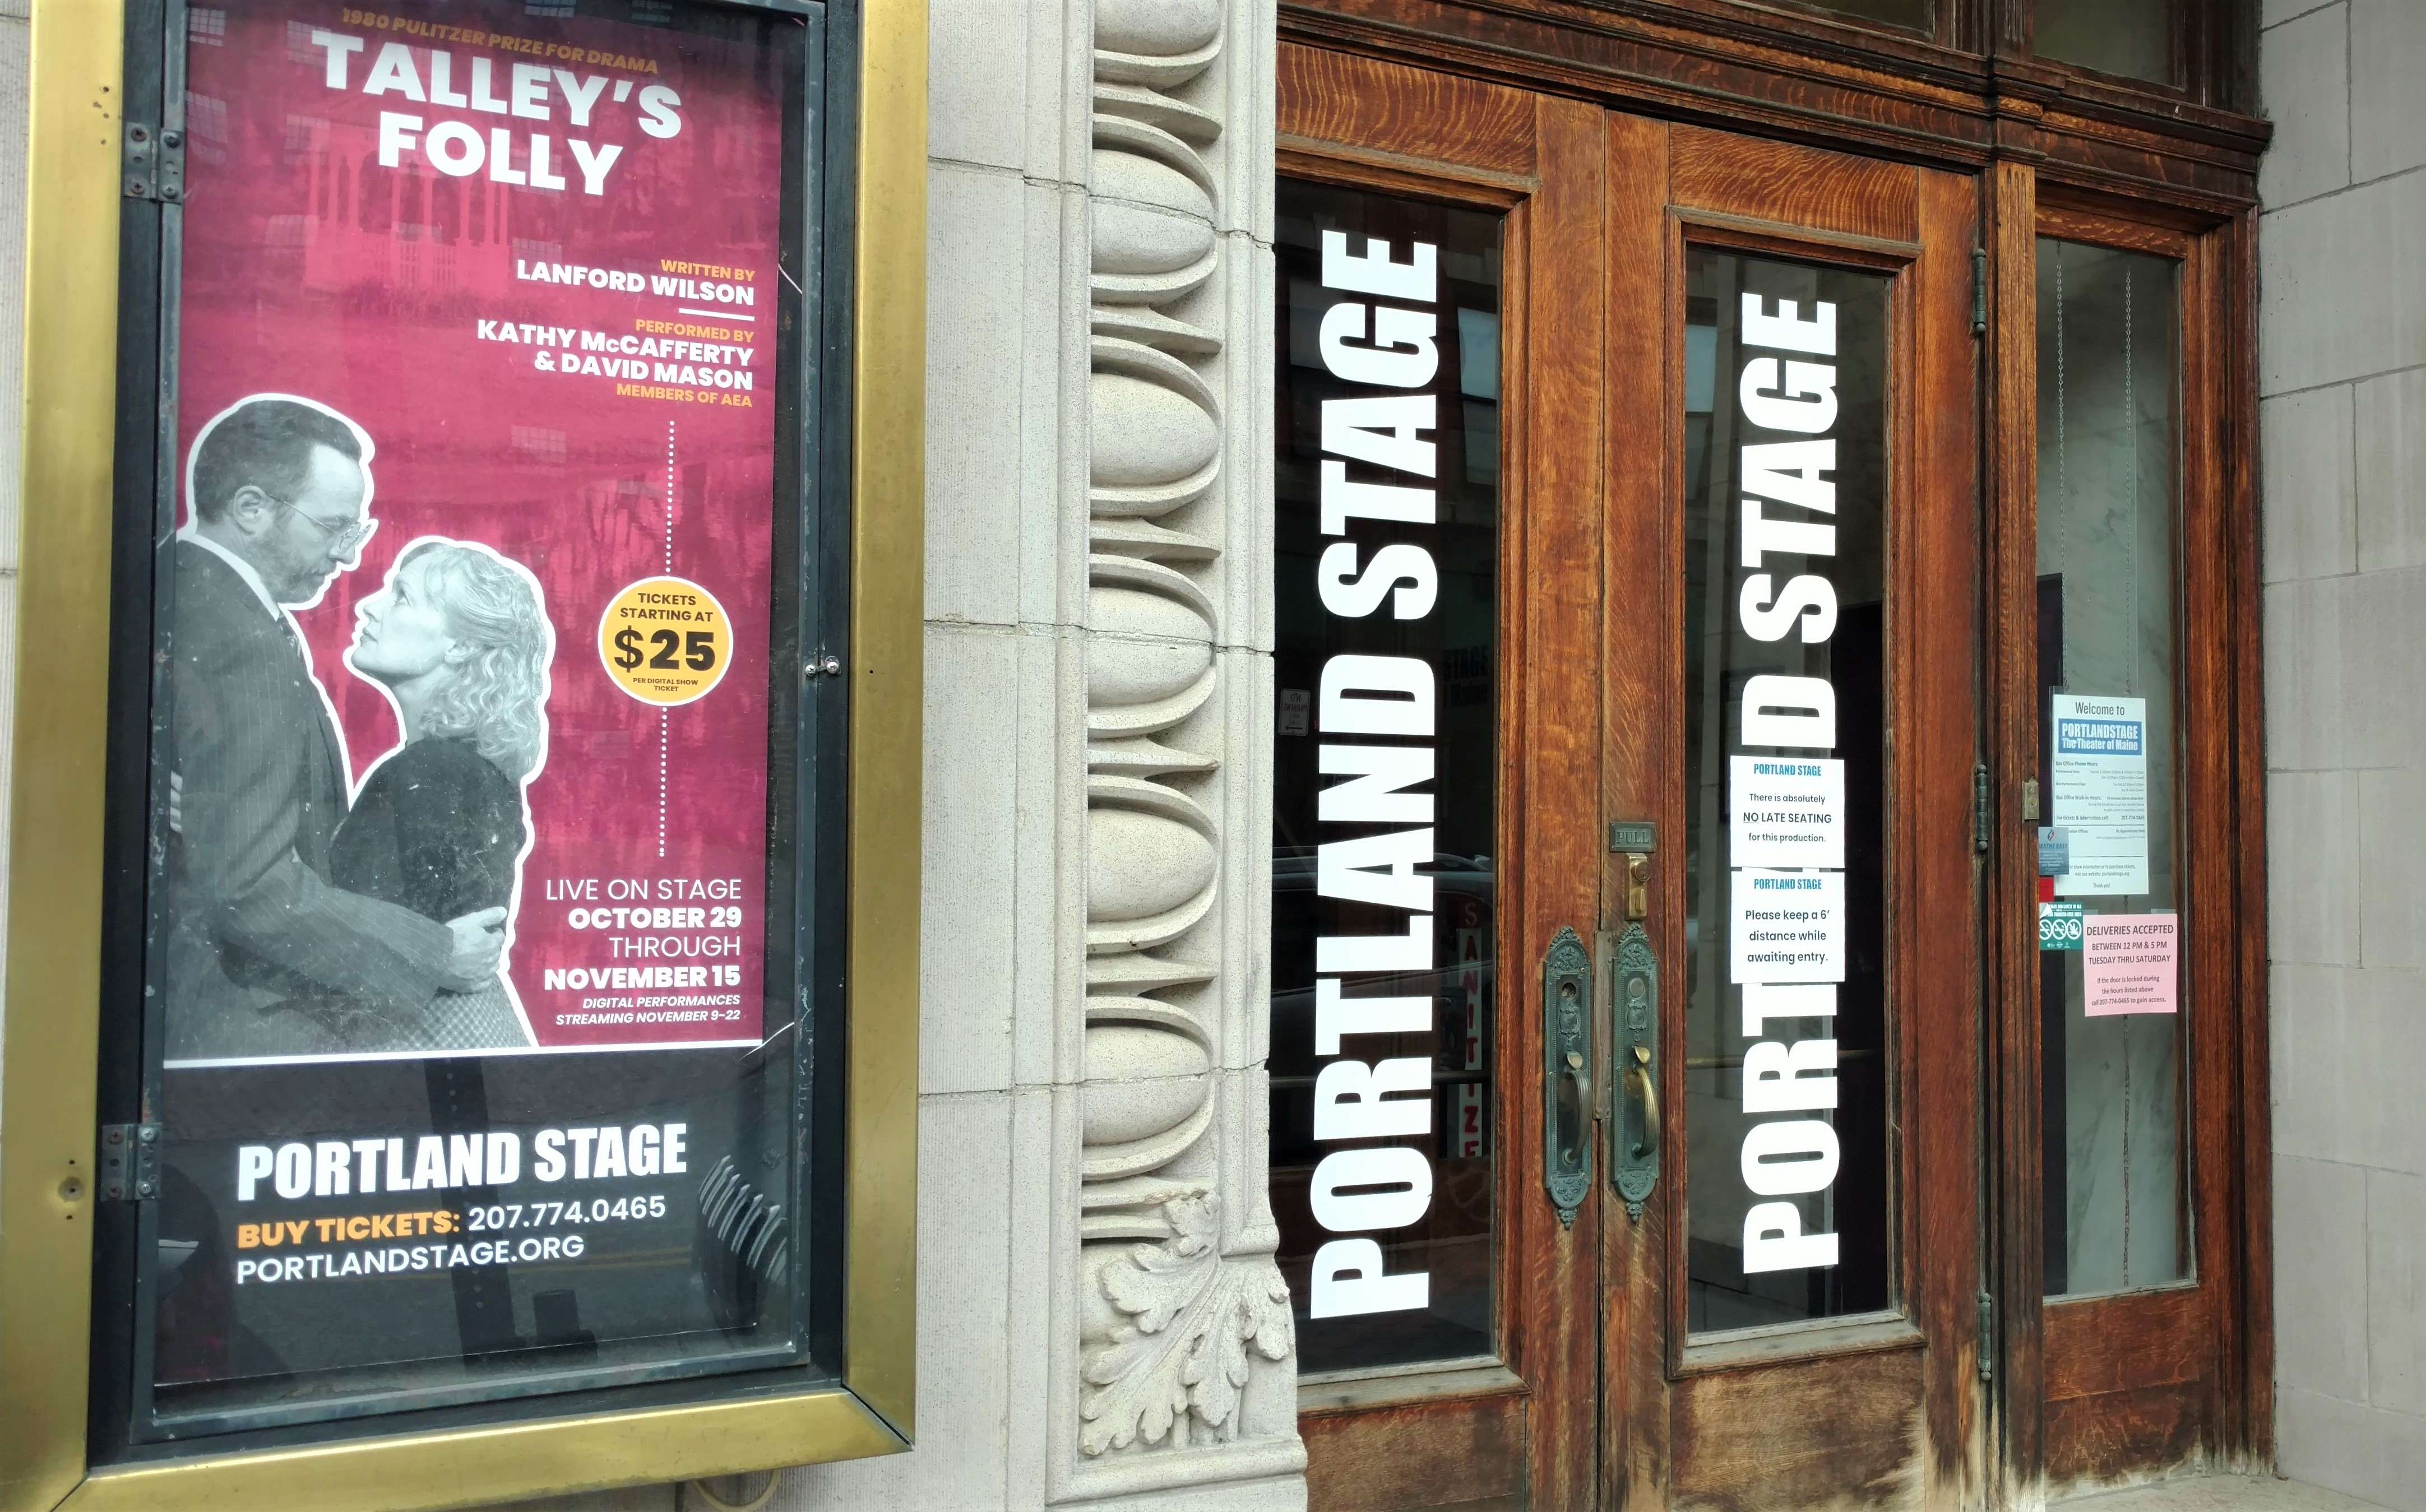 exterior doors with "portland stage" in bold letter, next to sign reading "talley's folly"